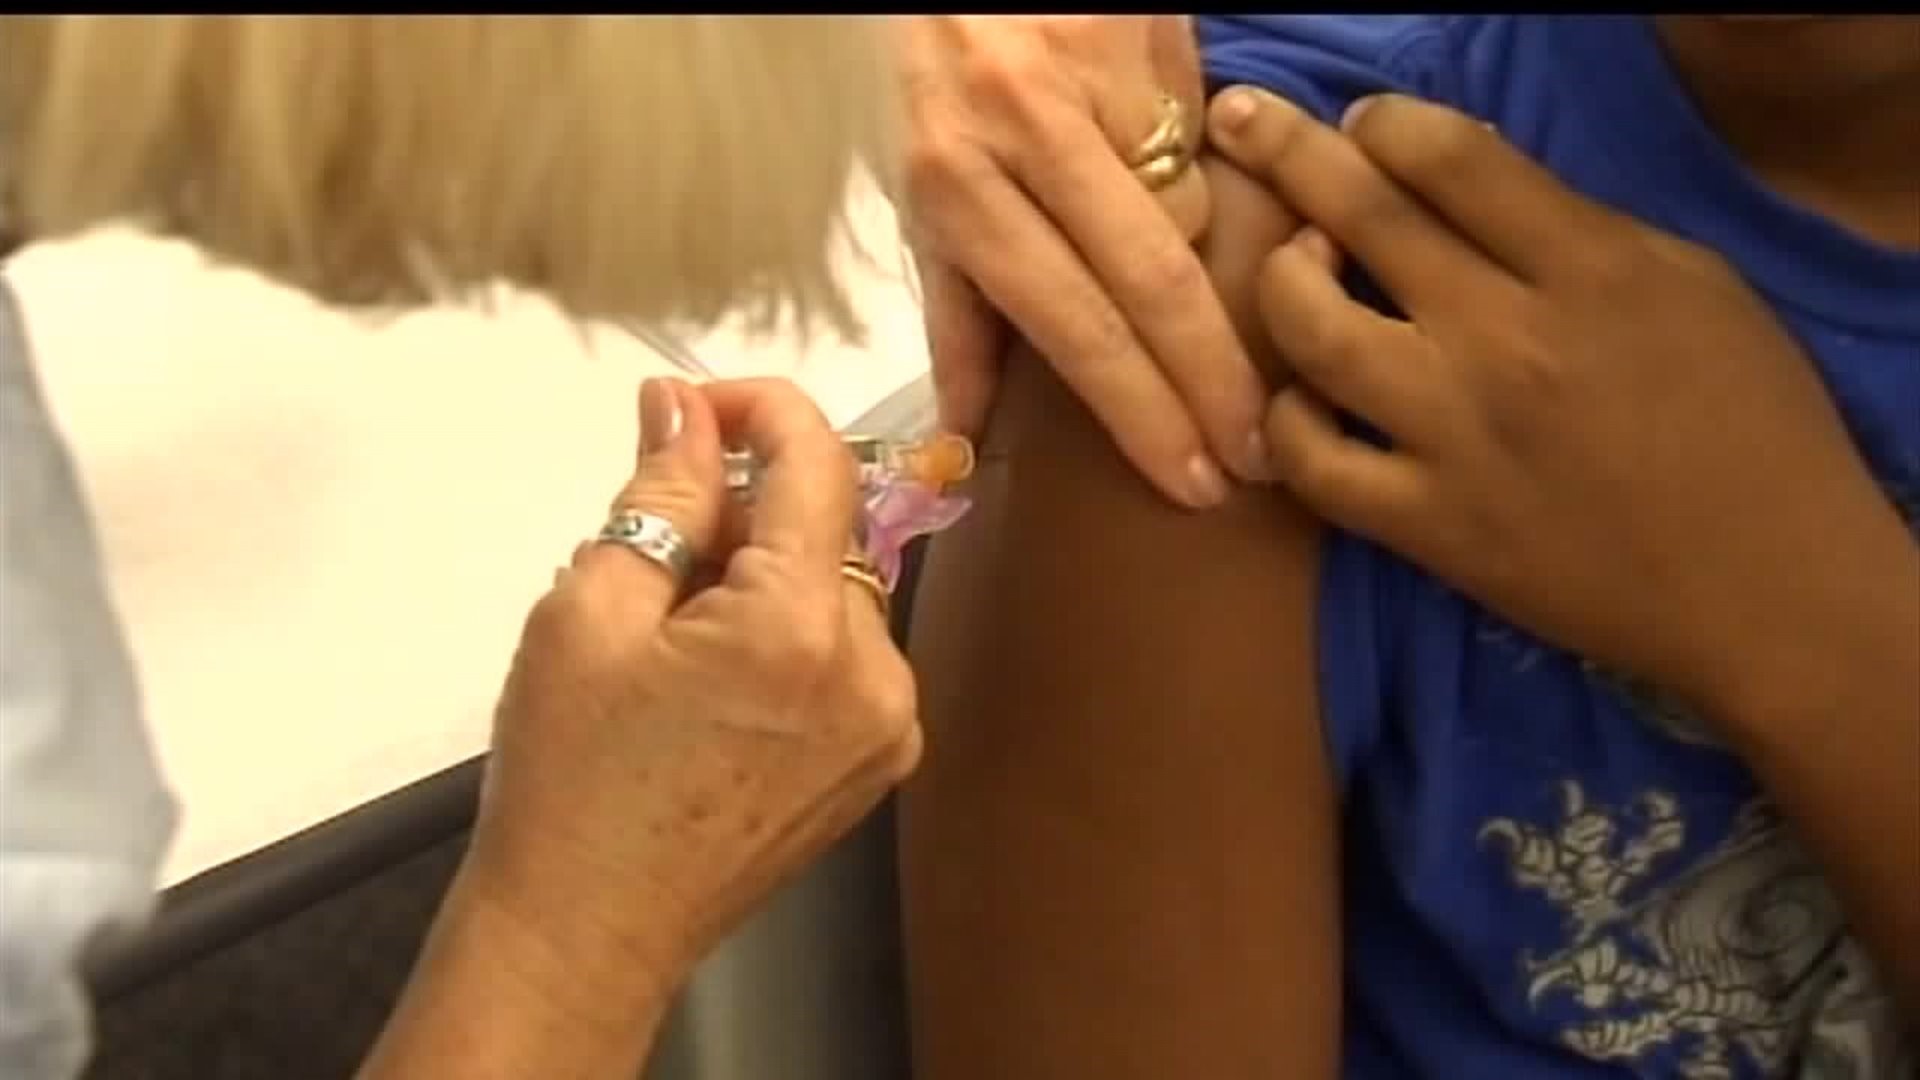 Immunization changes for the start of the school year